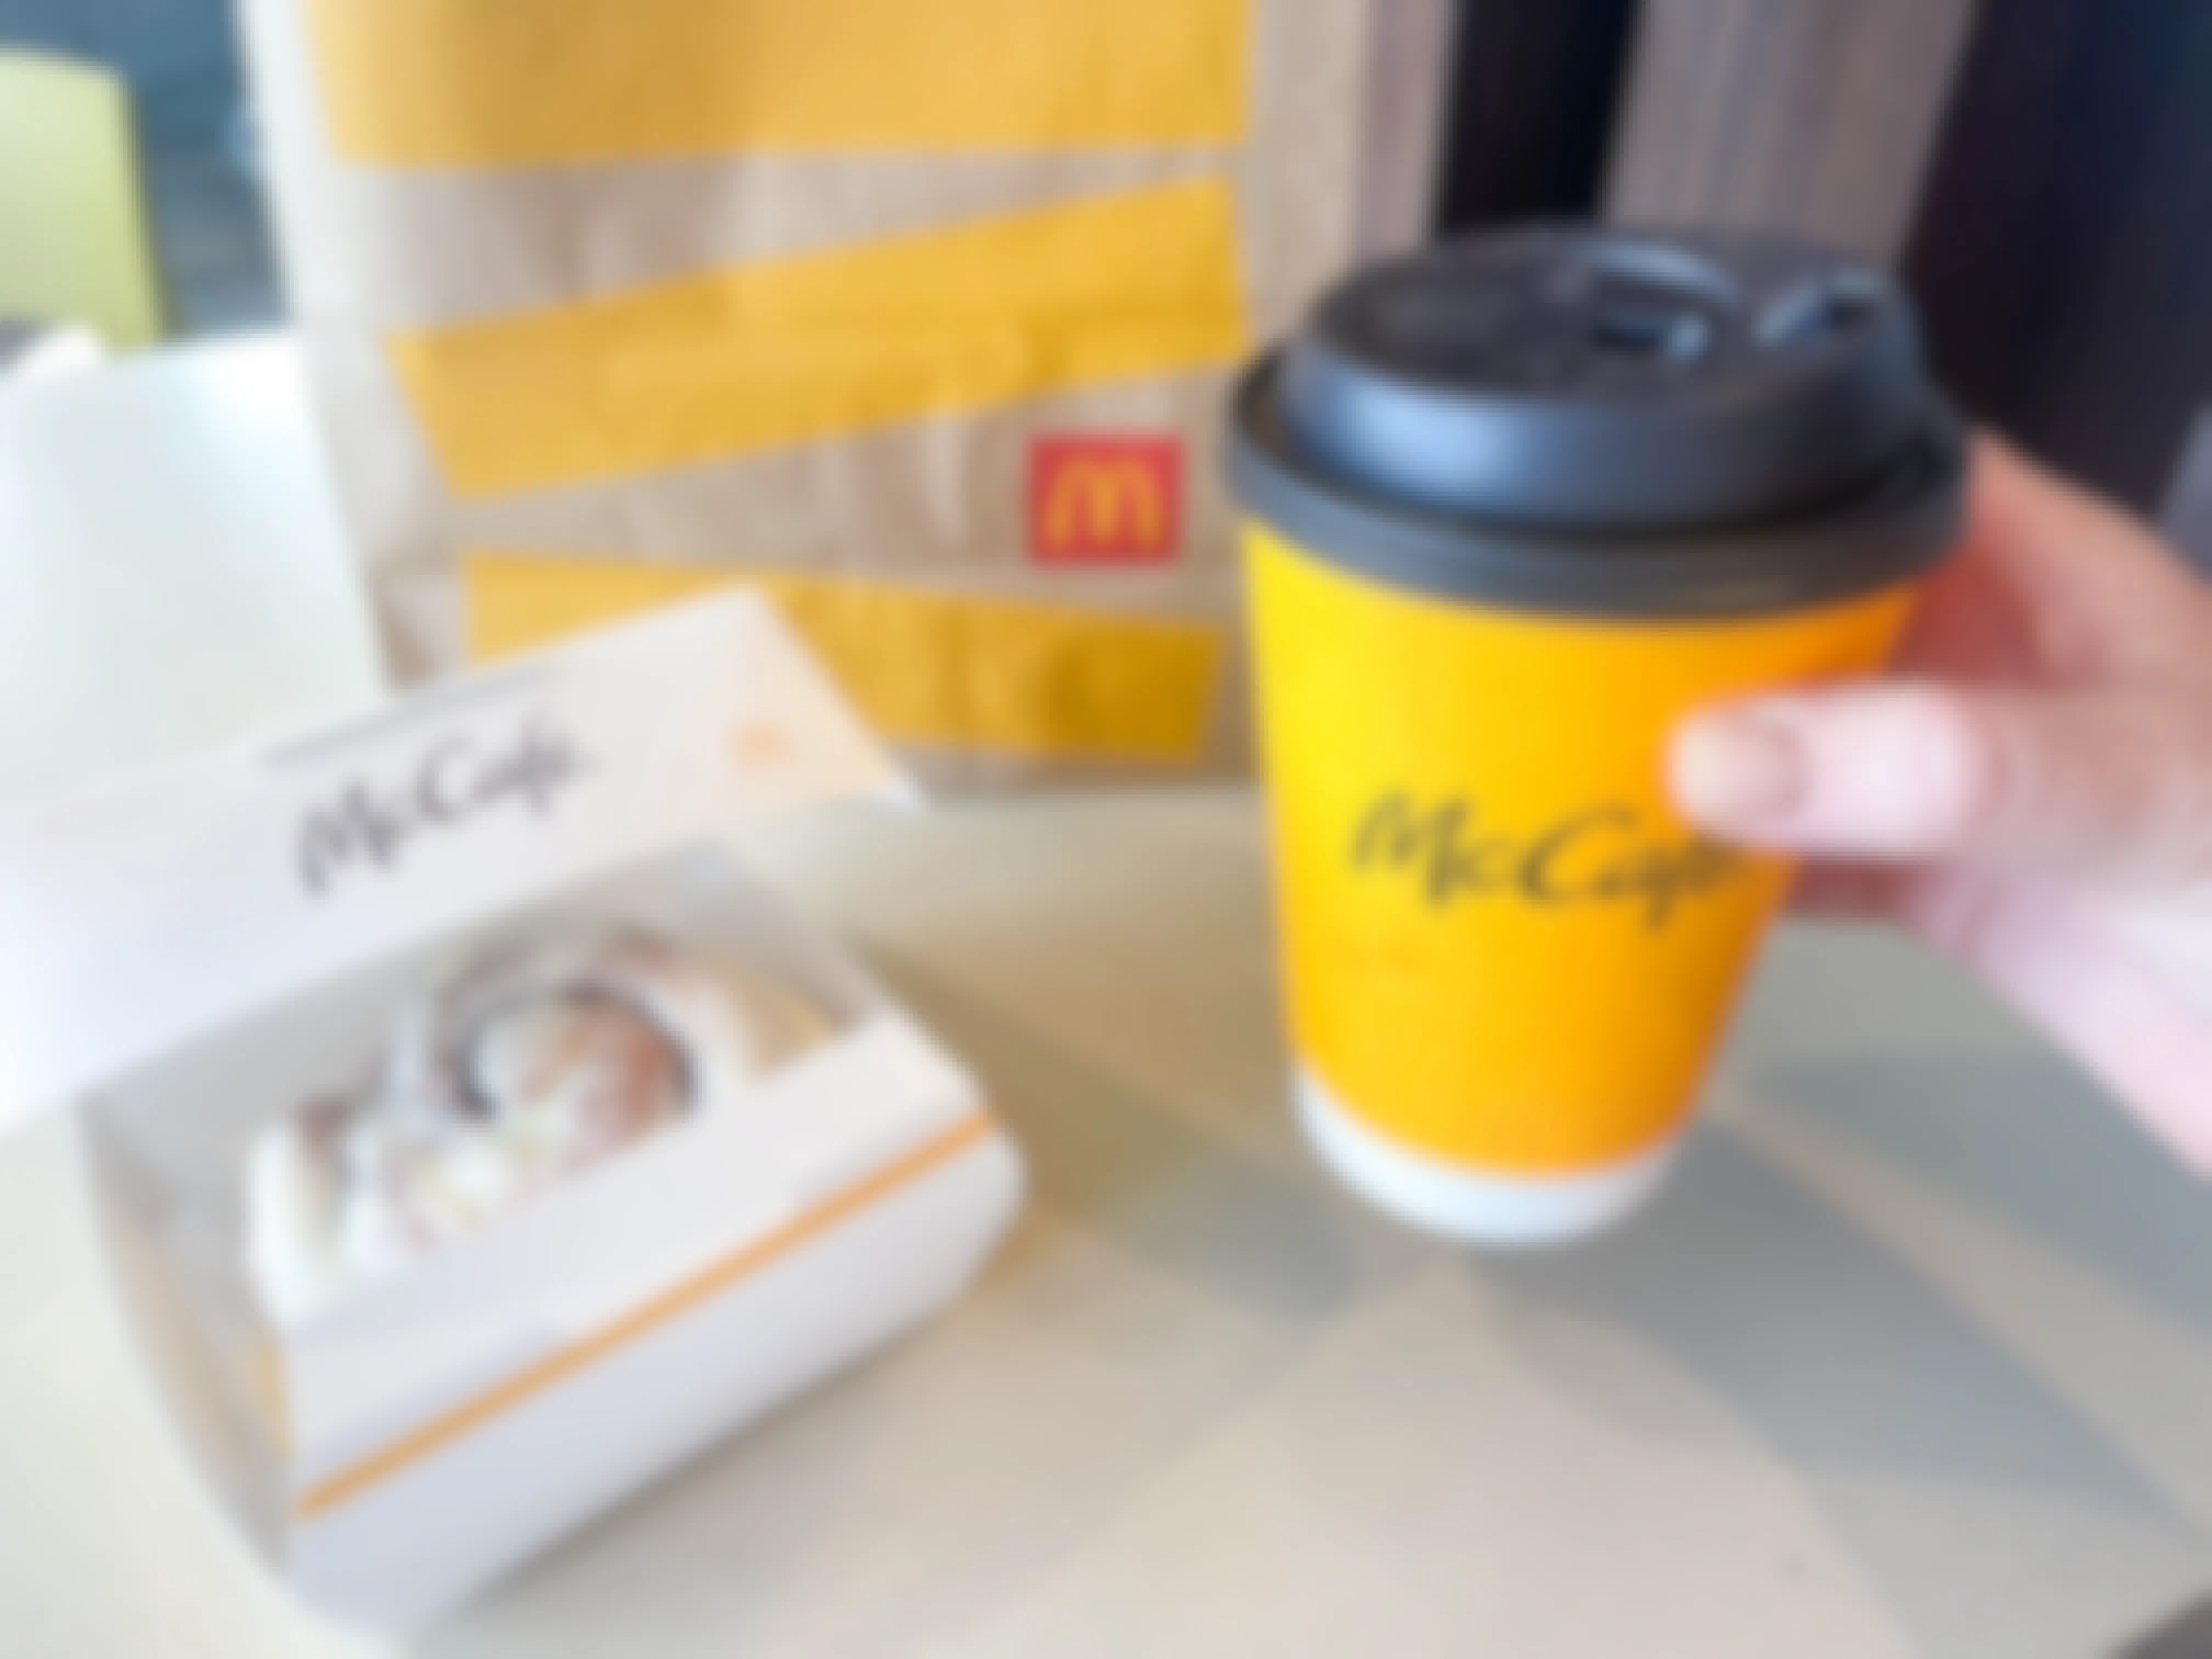 mccafe items on table at McDonalds